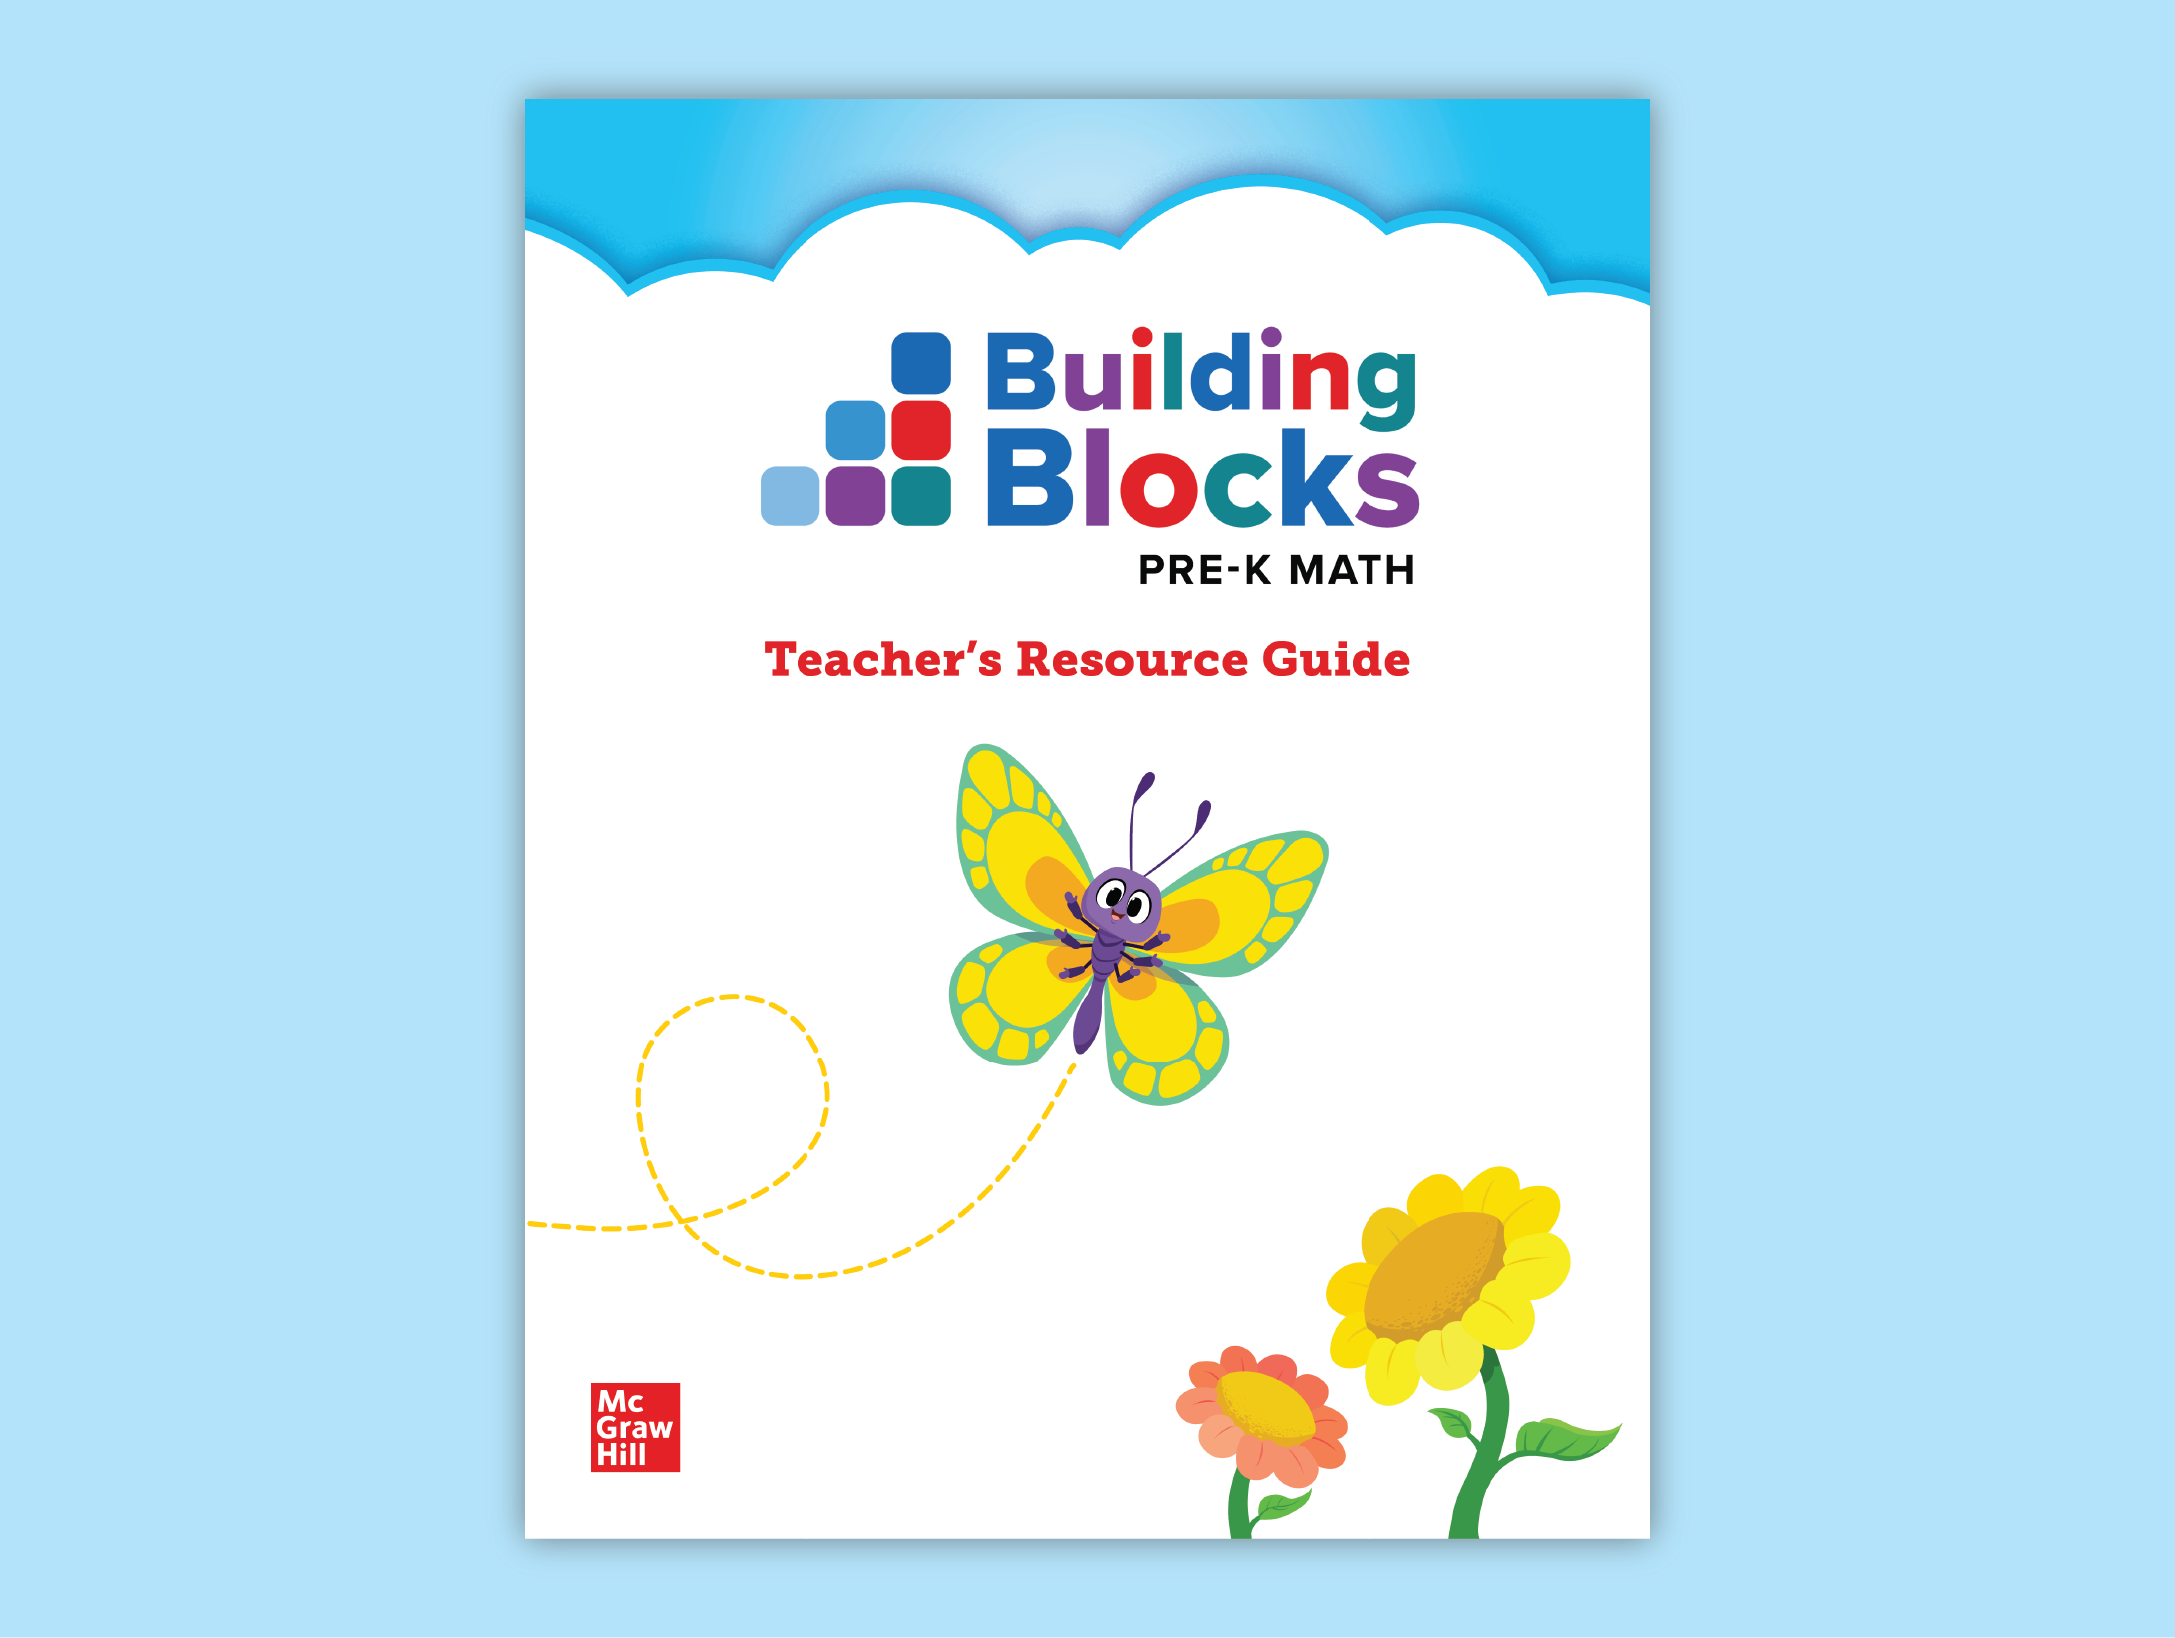 The cover of the Teacher’s Resource Guide